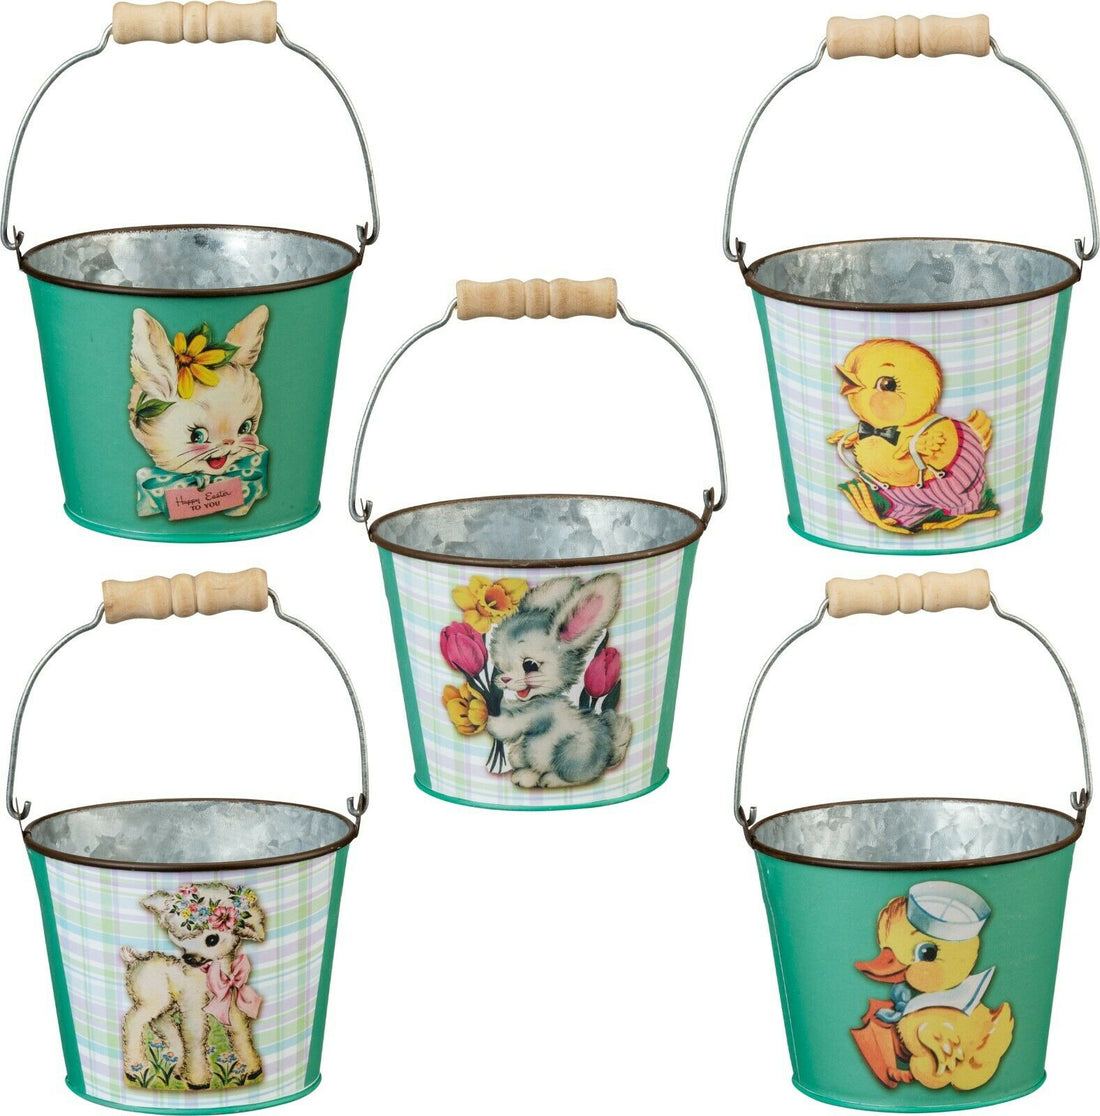 Primitive Retro Vintage Look Easter Metal Bucket 3 Styles Bunny Chick Lamb - The Primitive Pineapple Collection